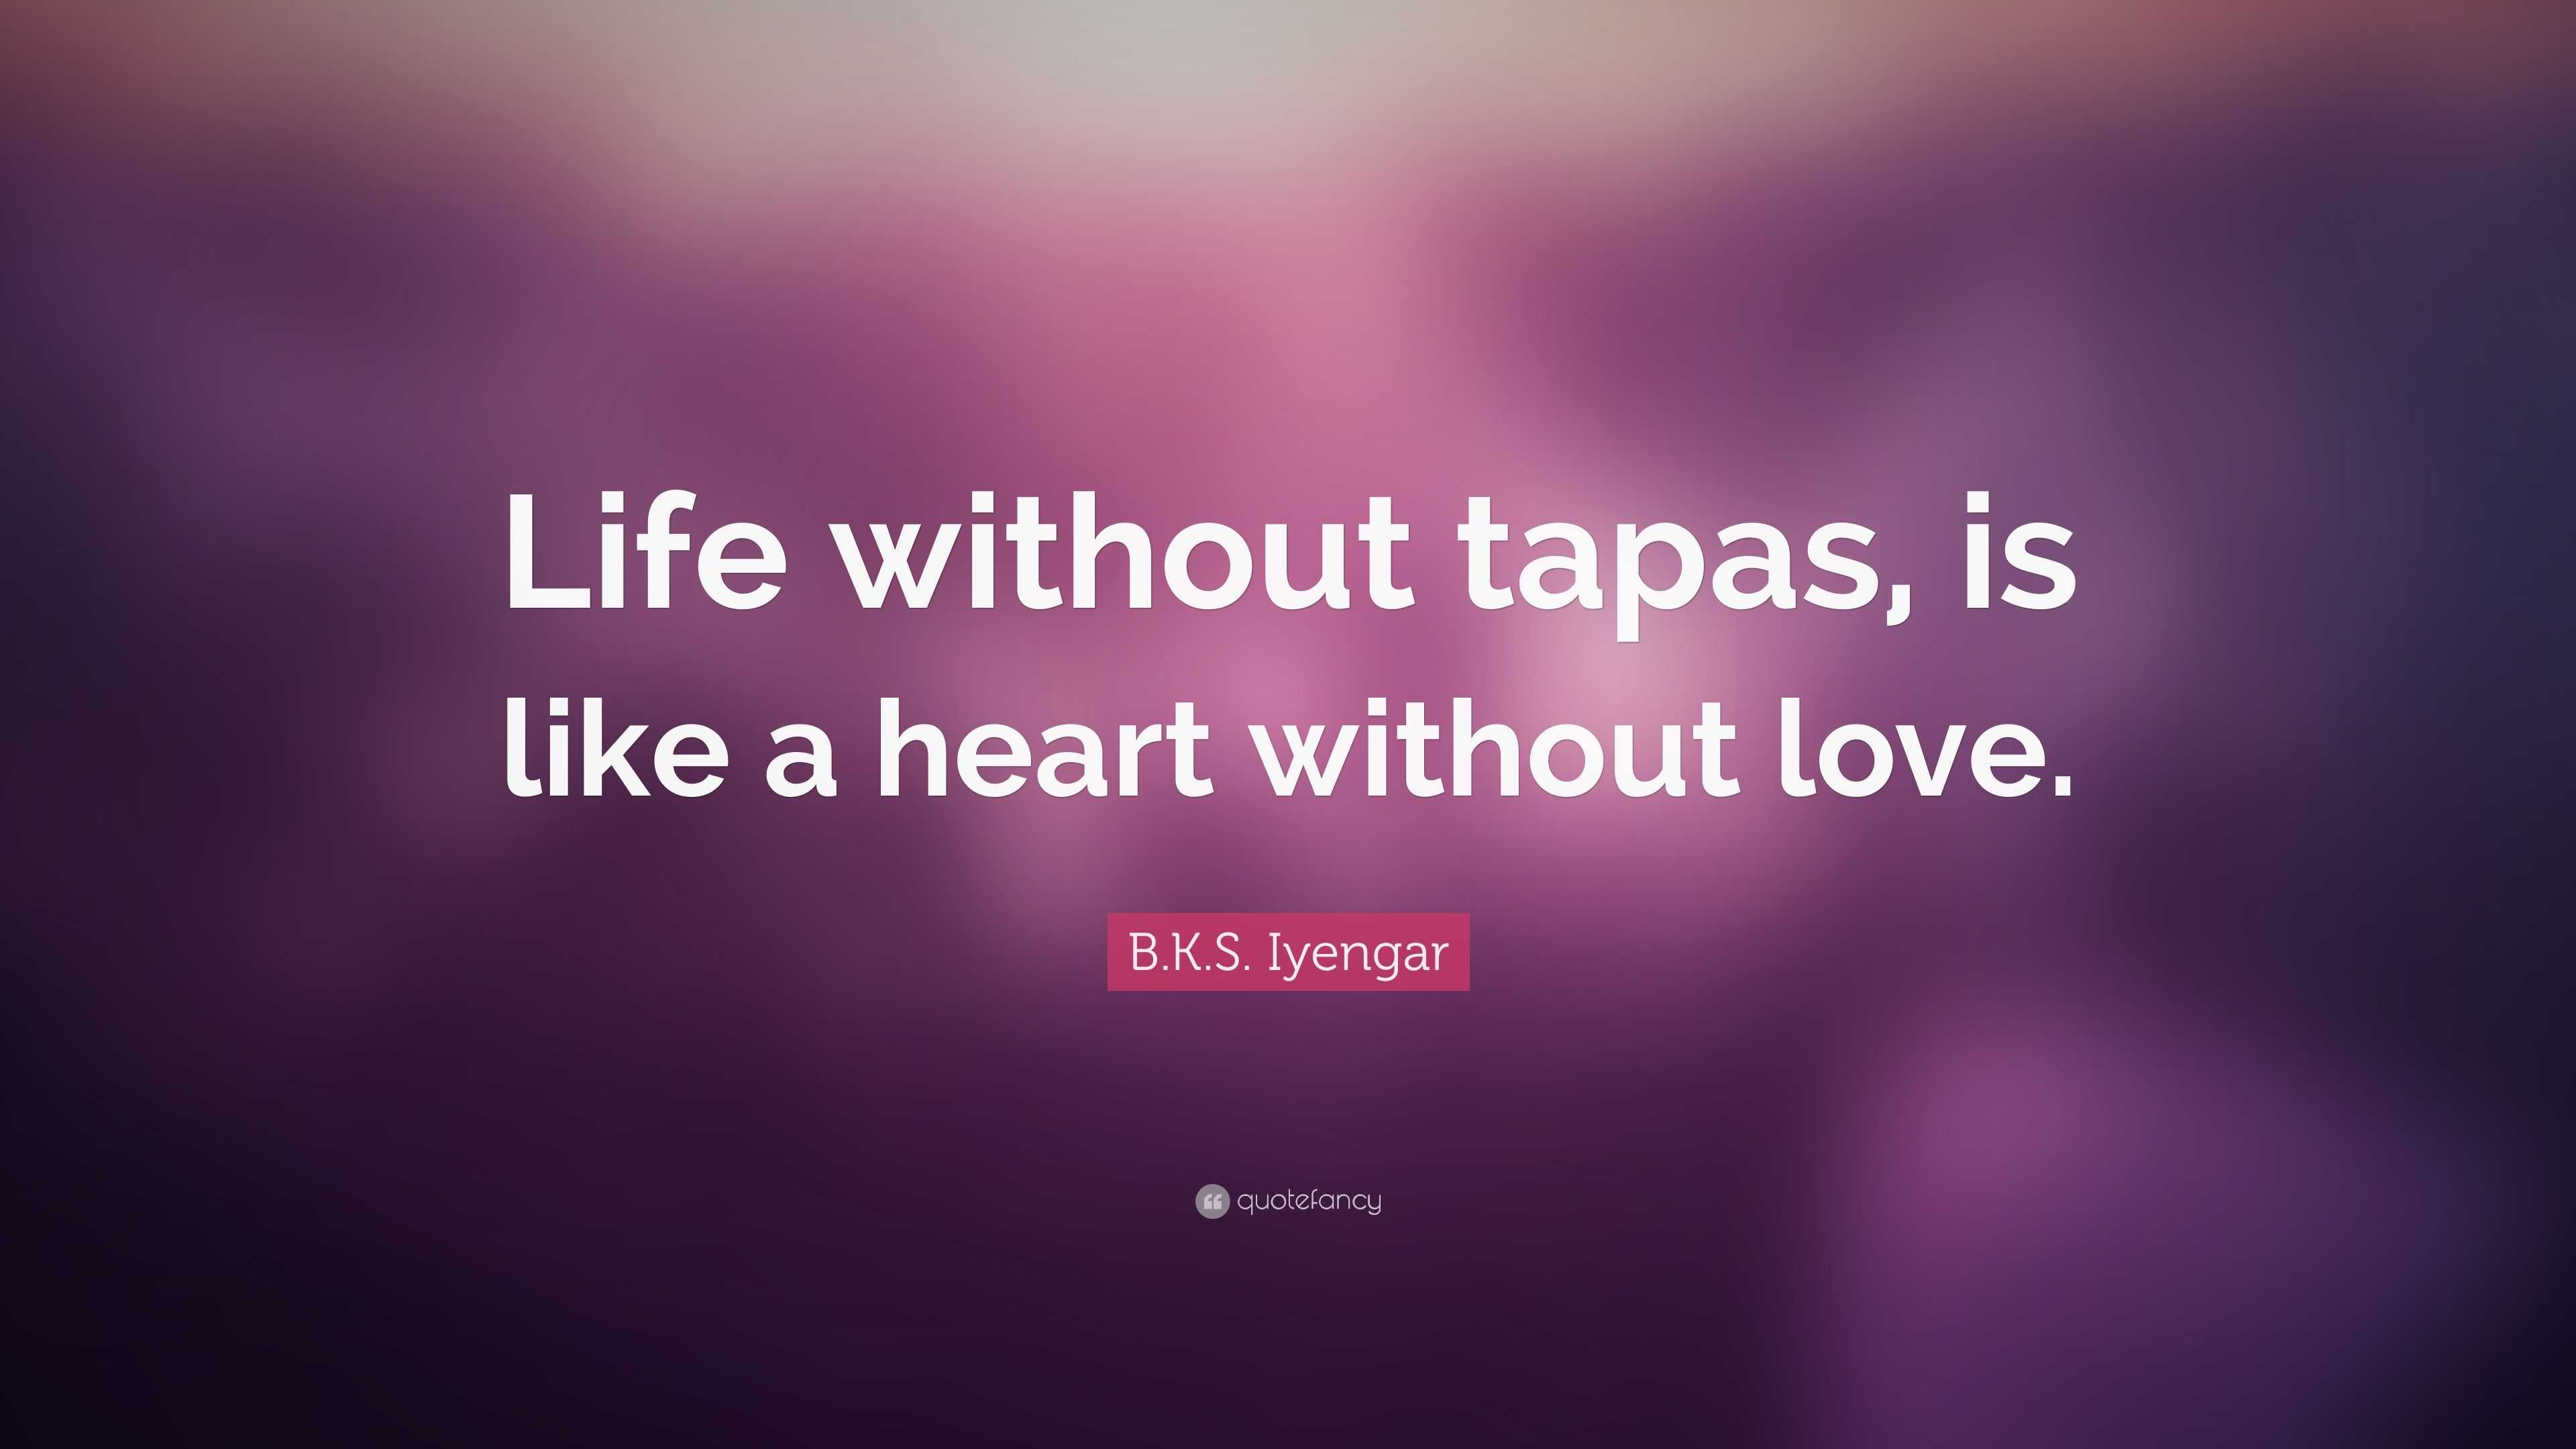 B K S Iyengar Quote “Life without tapas is like a heart without love